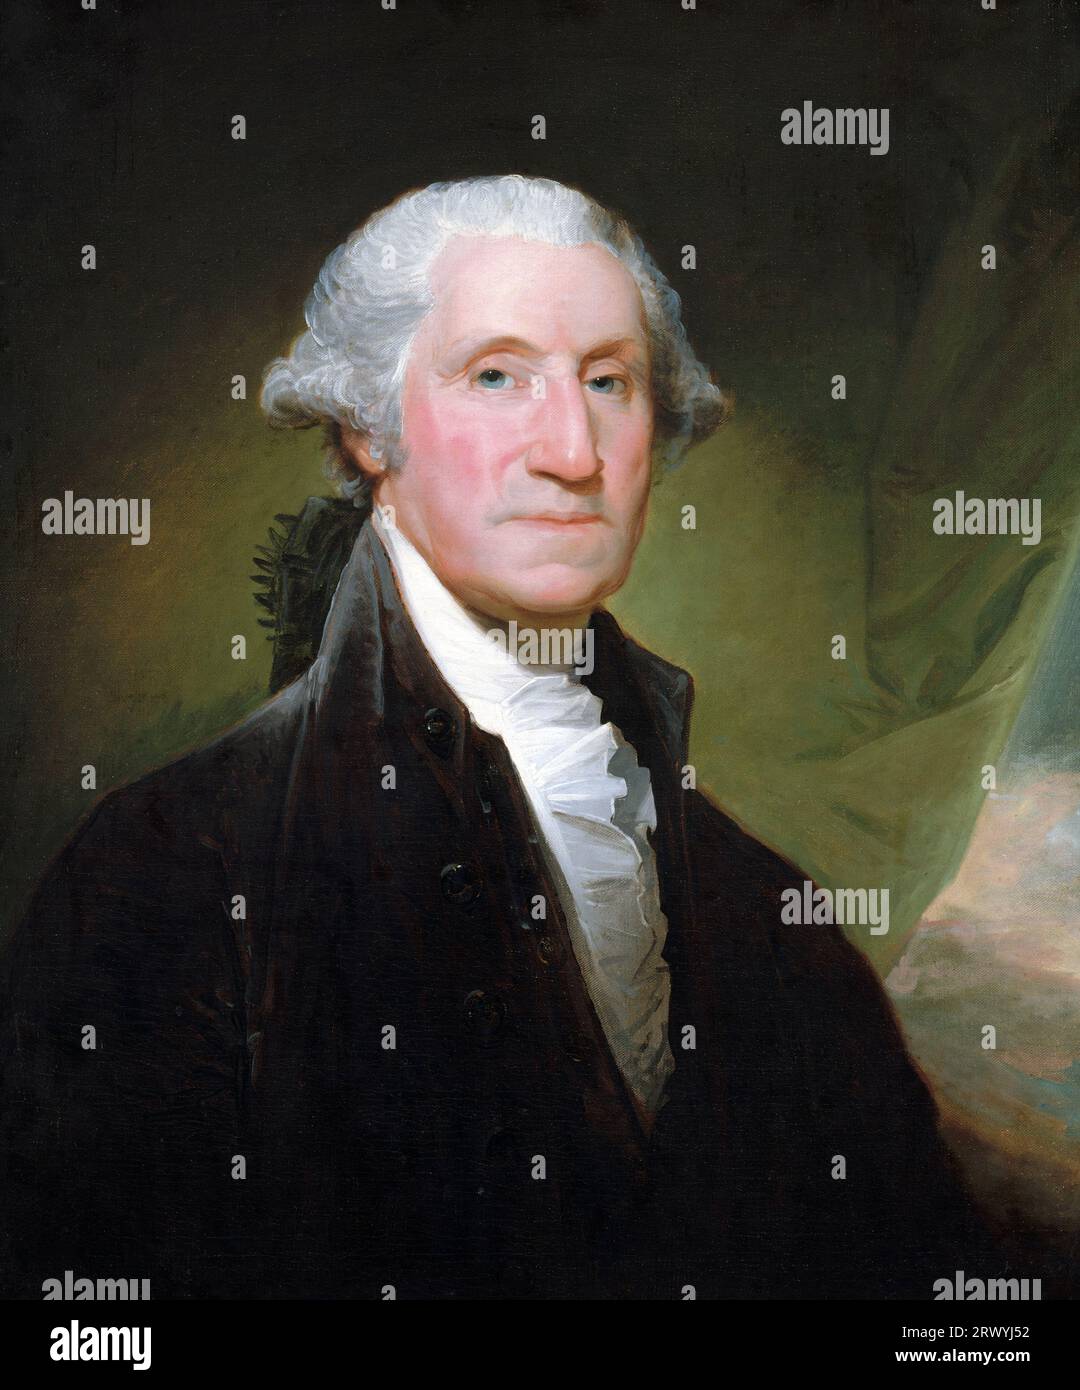 George Washington (1732 – 1799) American military officer, statesman, and Founding Father who served as the first president of the United States from 1789 to 1797. George Washington, 1795, Painting by Gilbert Stuart Stock Photo